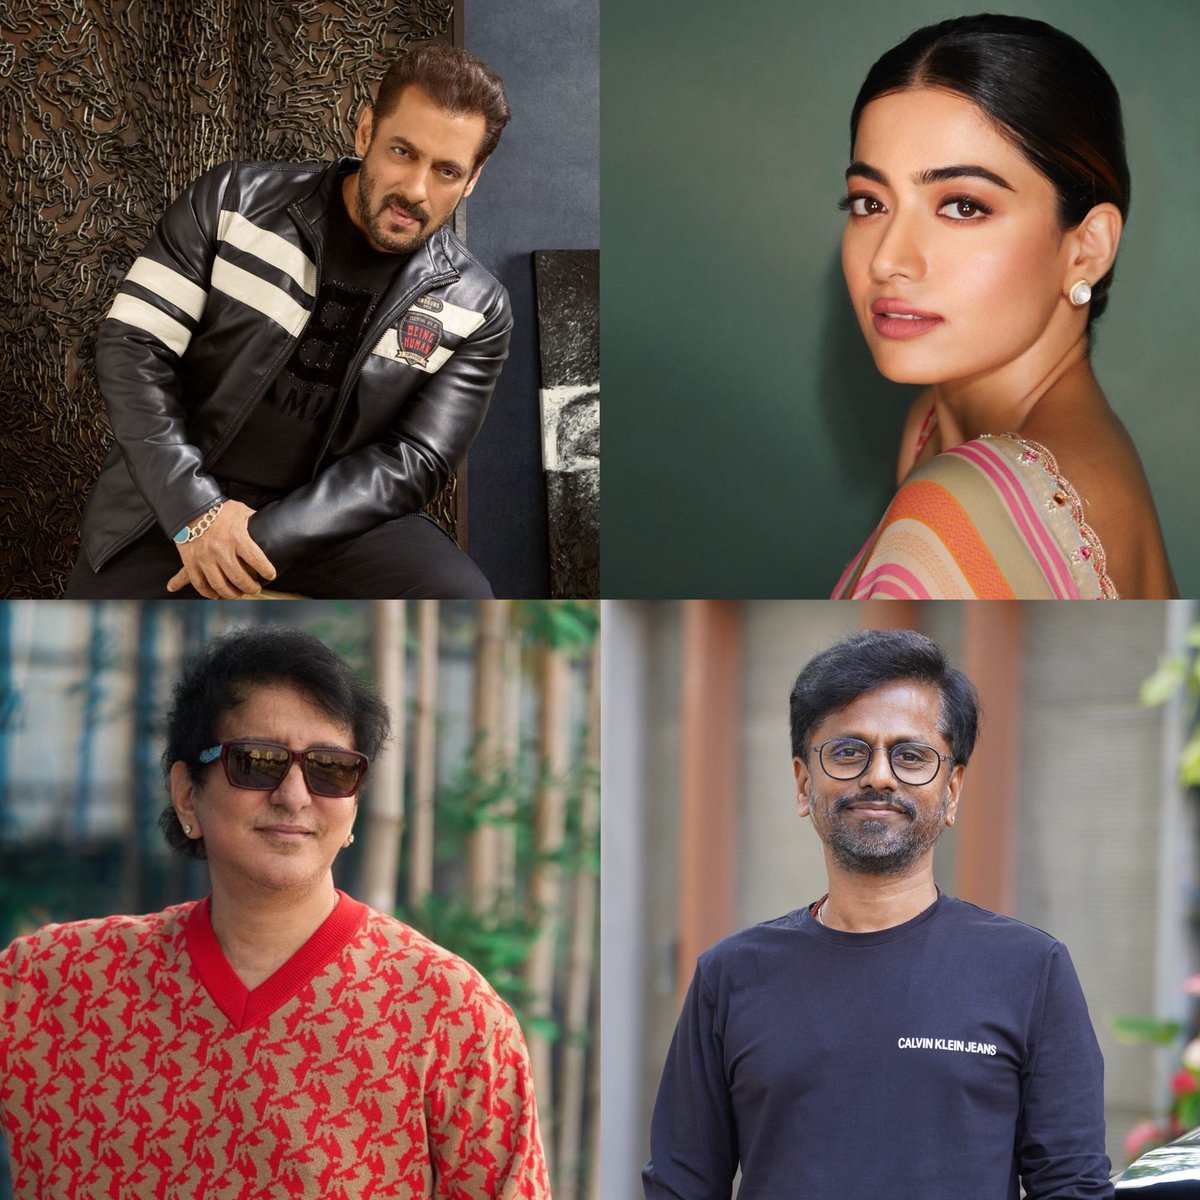 Welcoming the fabulous @iamRashmika to star opposite @BeingSalmanKhan in #Sikandar! Can't wait for their on-screen magic to unfold on EID 2025! ✨ #SajidNadiadwala's #Sikandar Directed by @ARMurugadoss Releasing in cinemas EID 2025 🎬 @WardaNadiadwala #SikandarEid2025